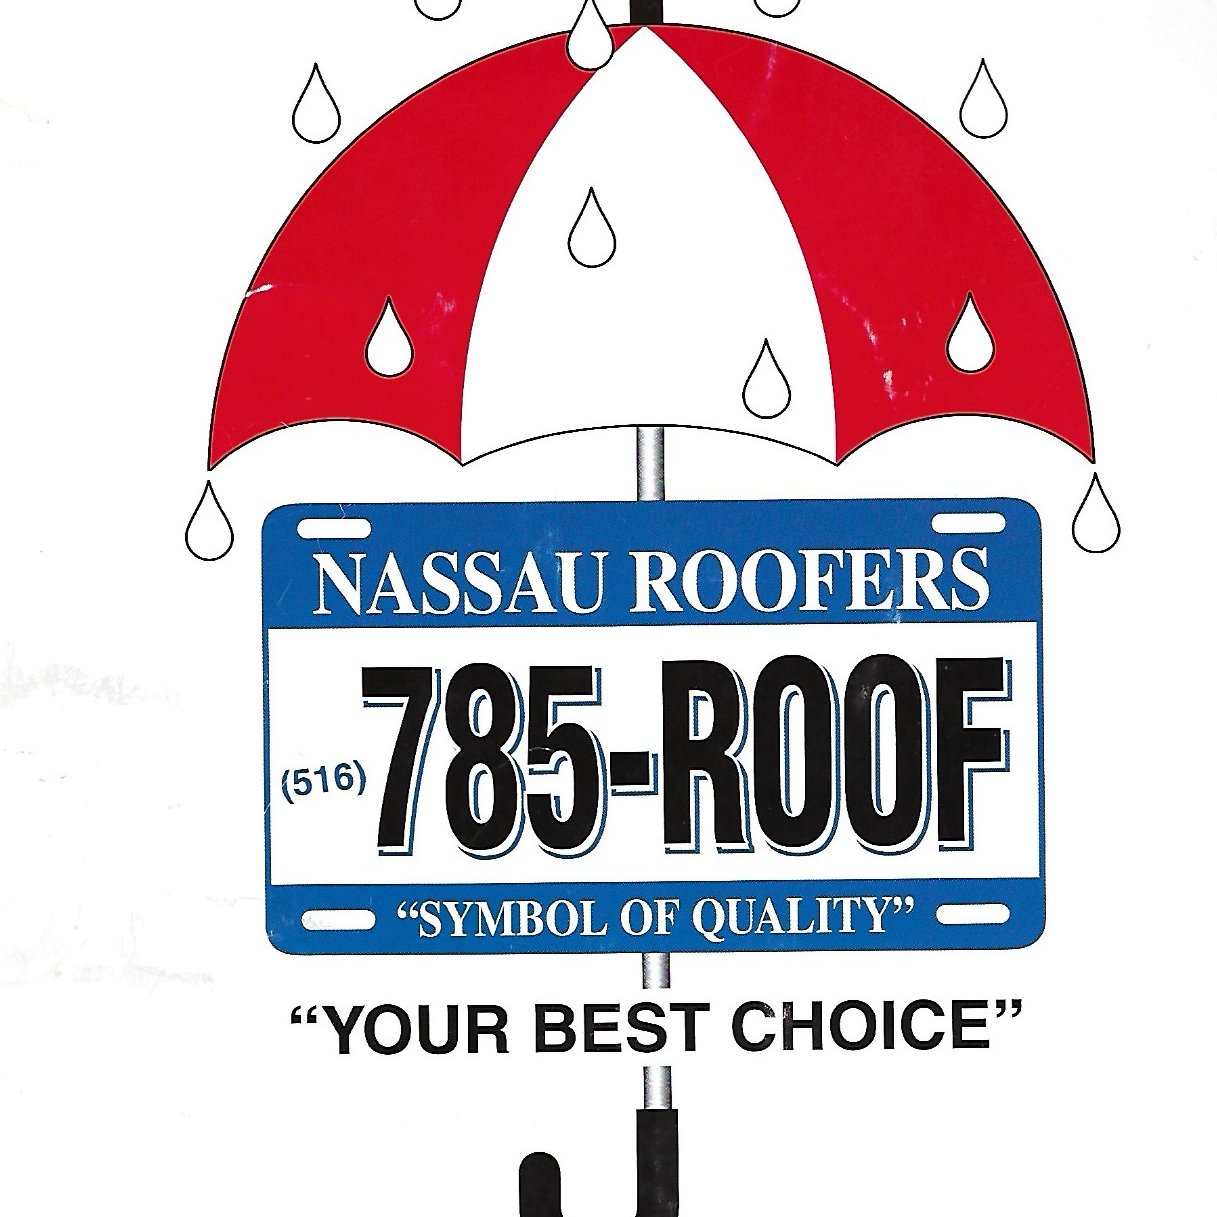 We are a local, family-owned roofing business. Established in 1978, we have a proven track record as experienced professionals.